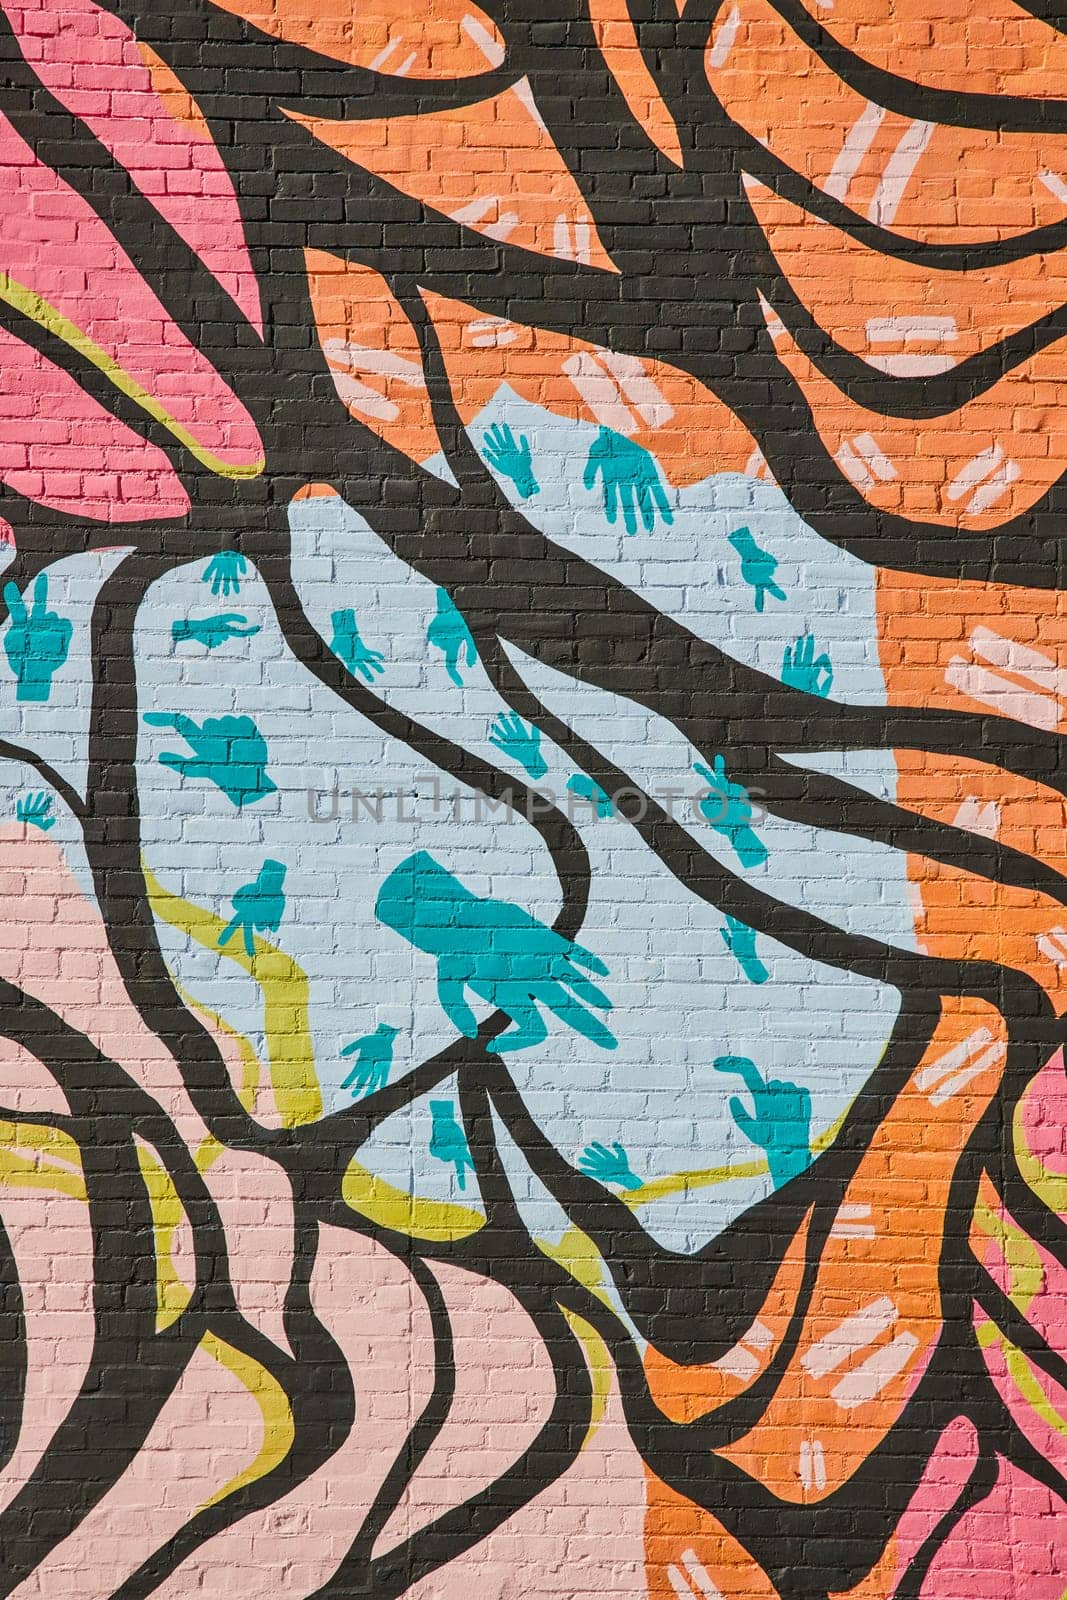 Colorful Community Mural on Brick Wall, Urban Street Art by njproductions